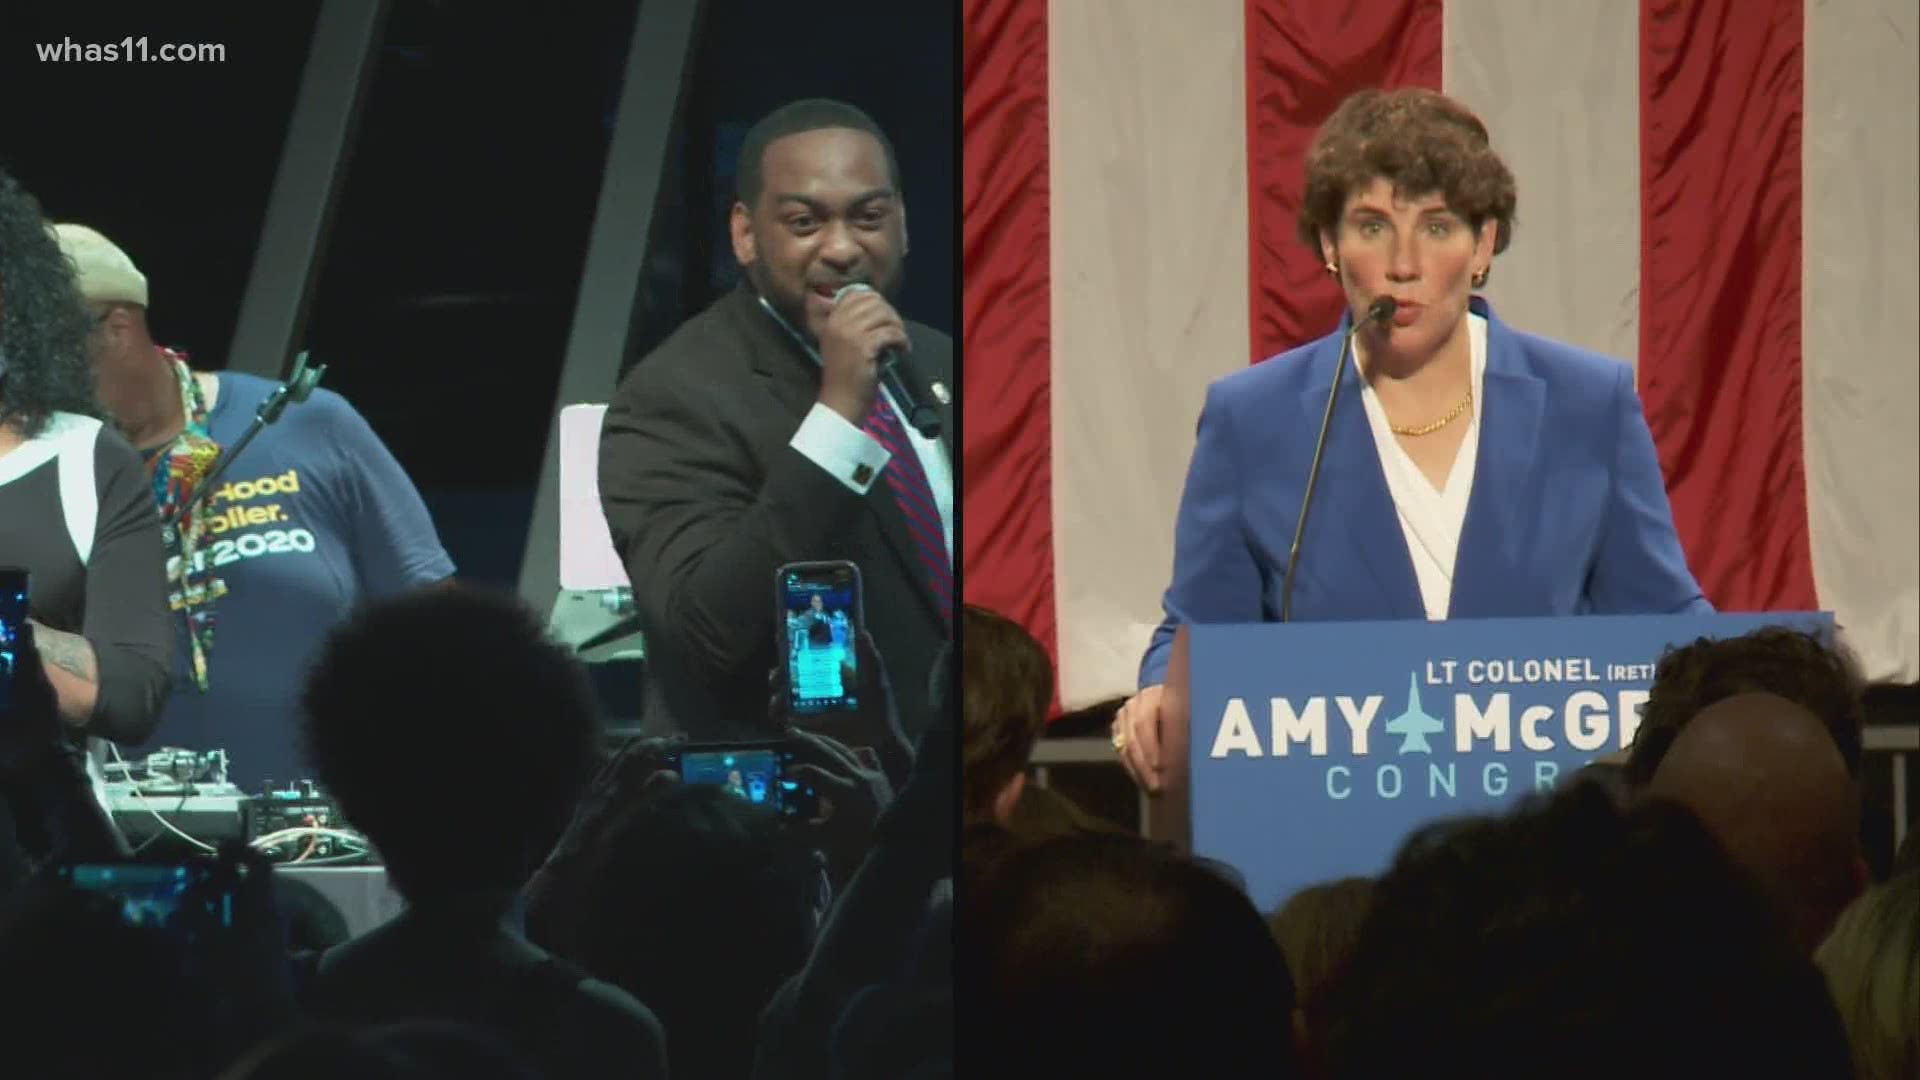 What's next for Amy McGrath after her win against State Rep. Charles Booker in a high-profile Democratic primary.